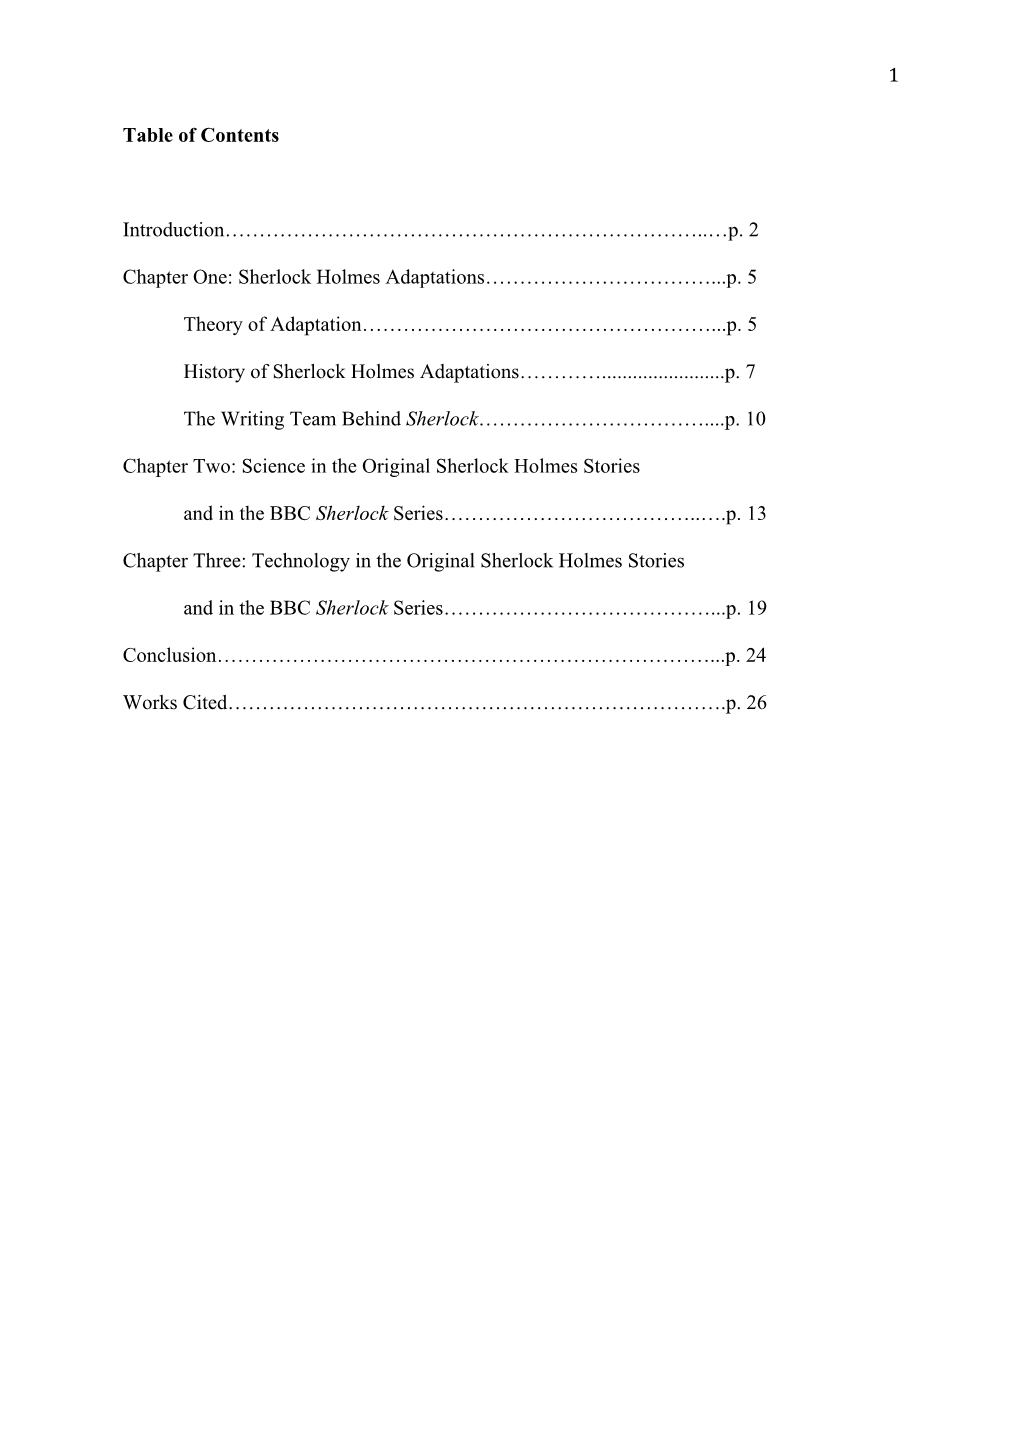 1 Table of Contents Introduction